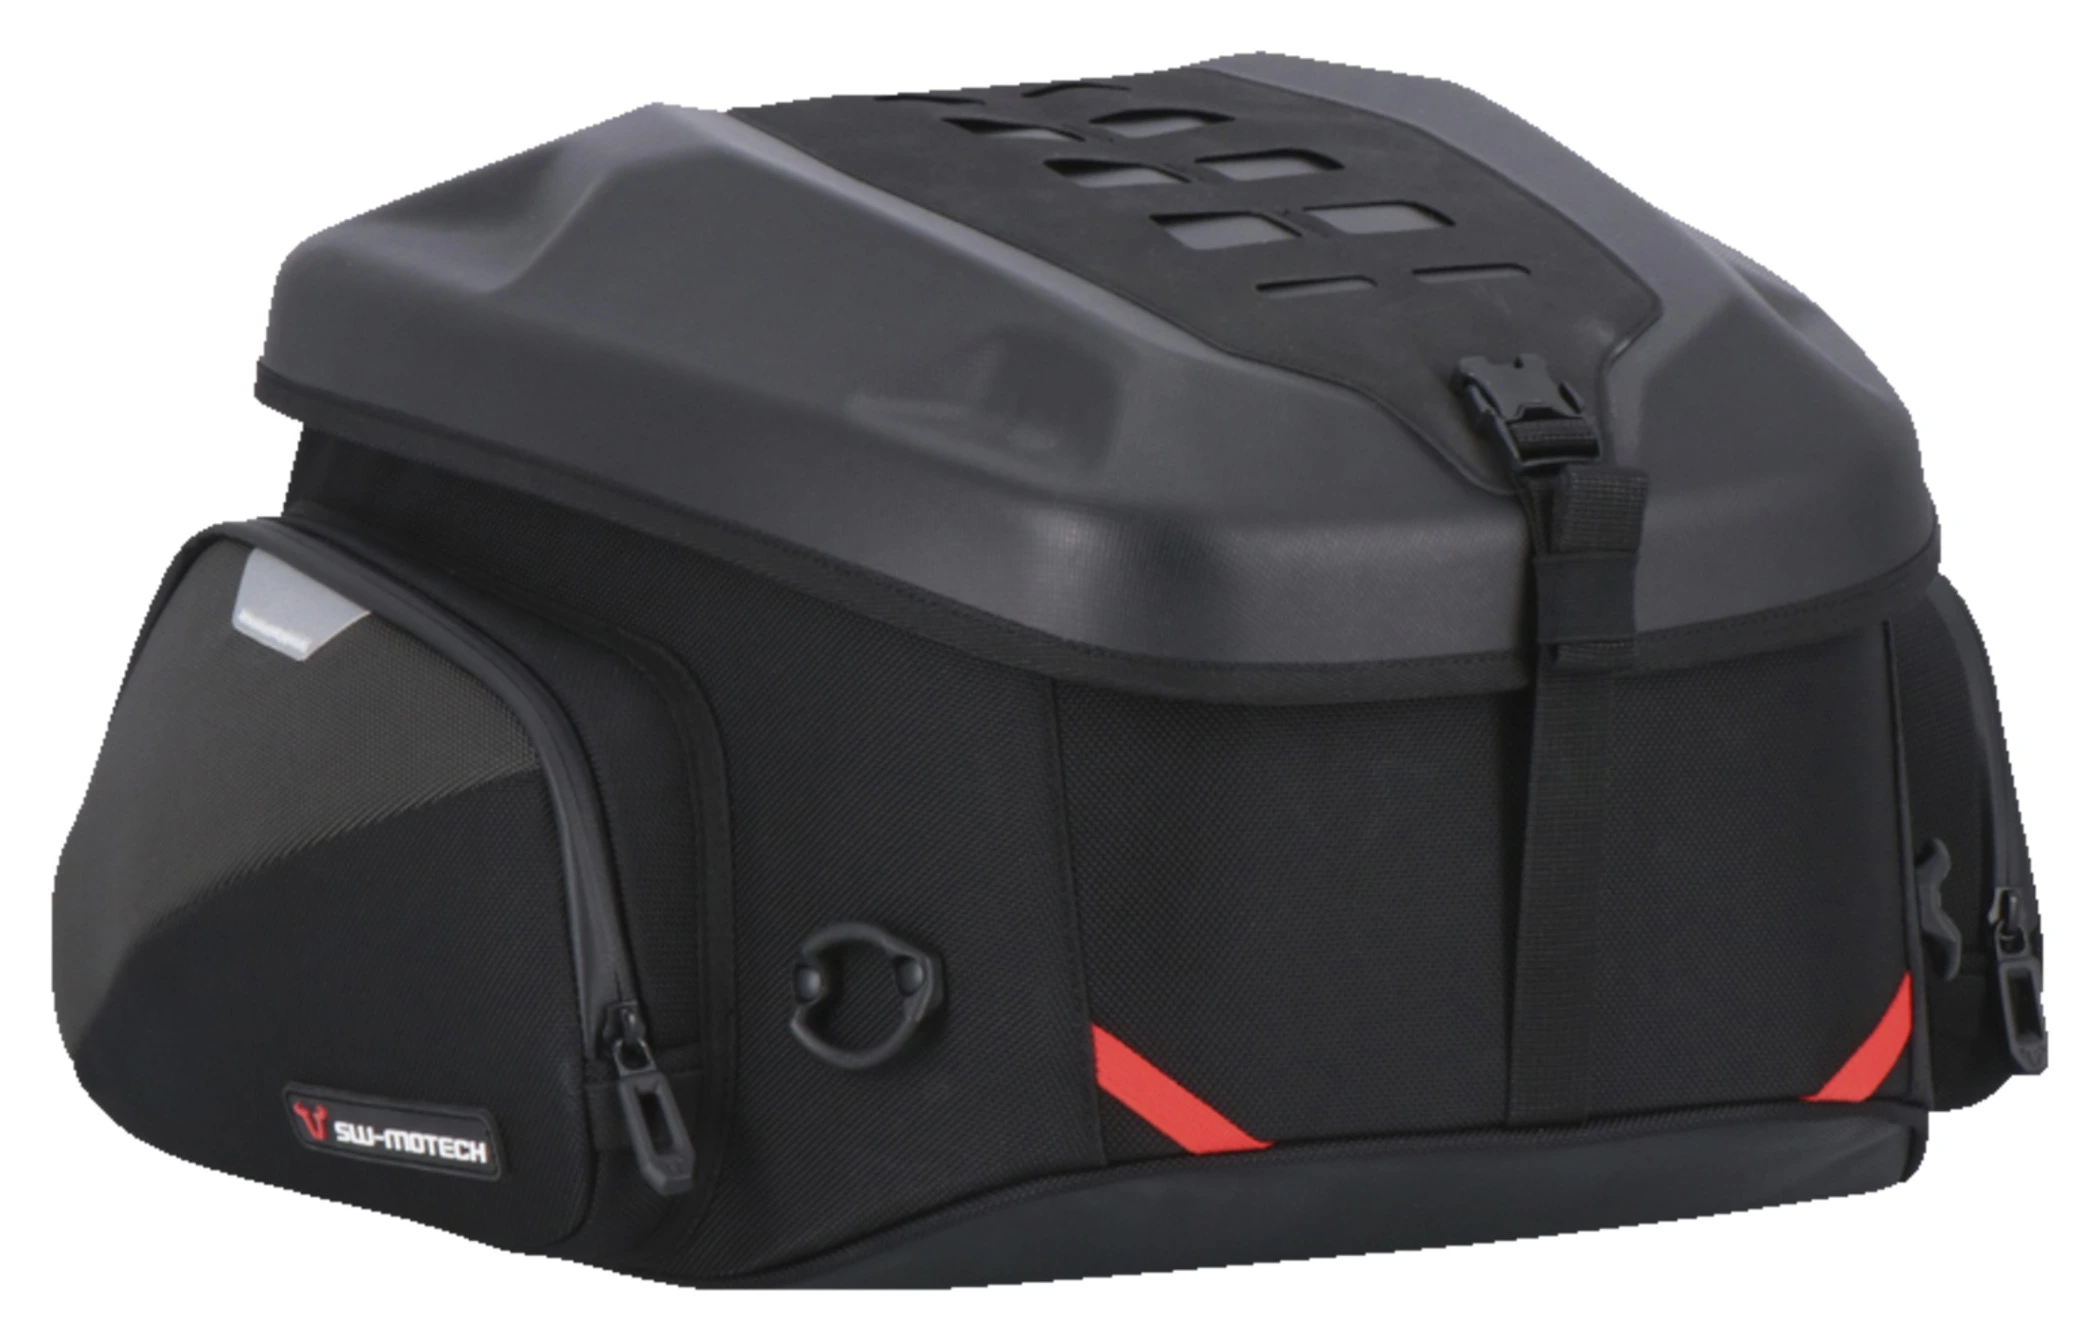 Motorcycle tail bag PRO Cargobag from SW-MOTECH